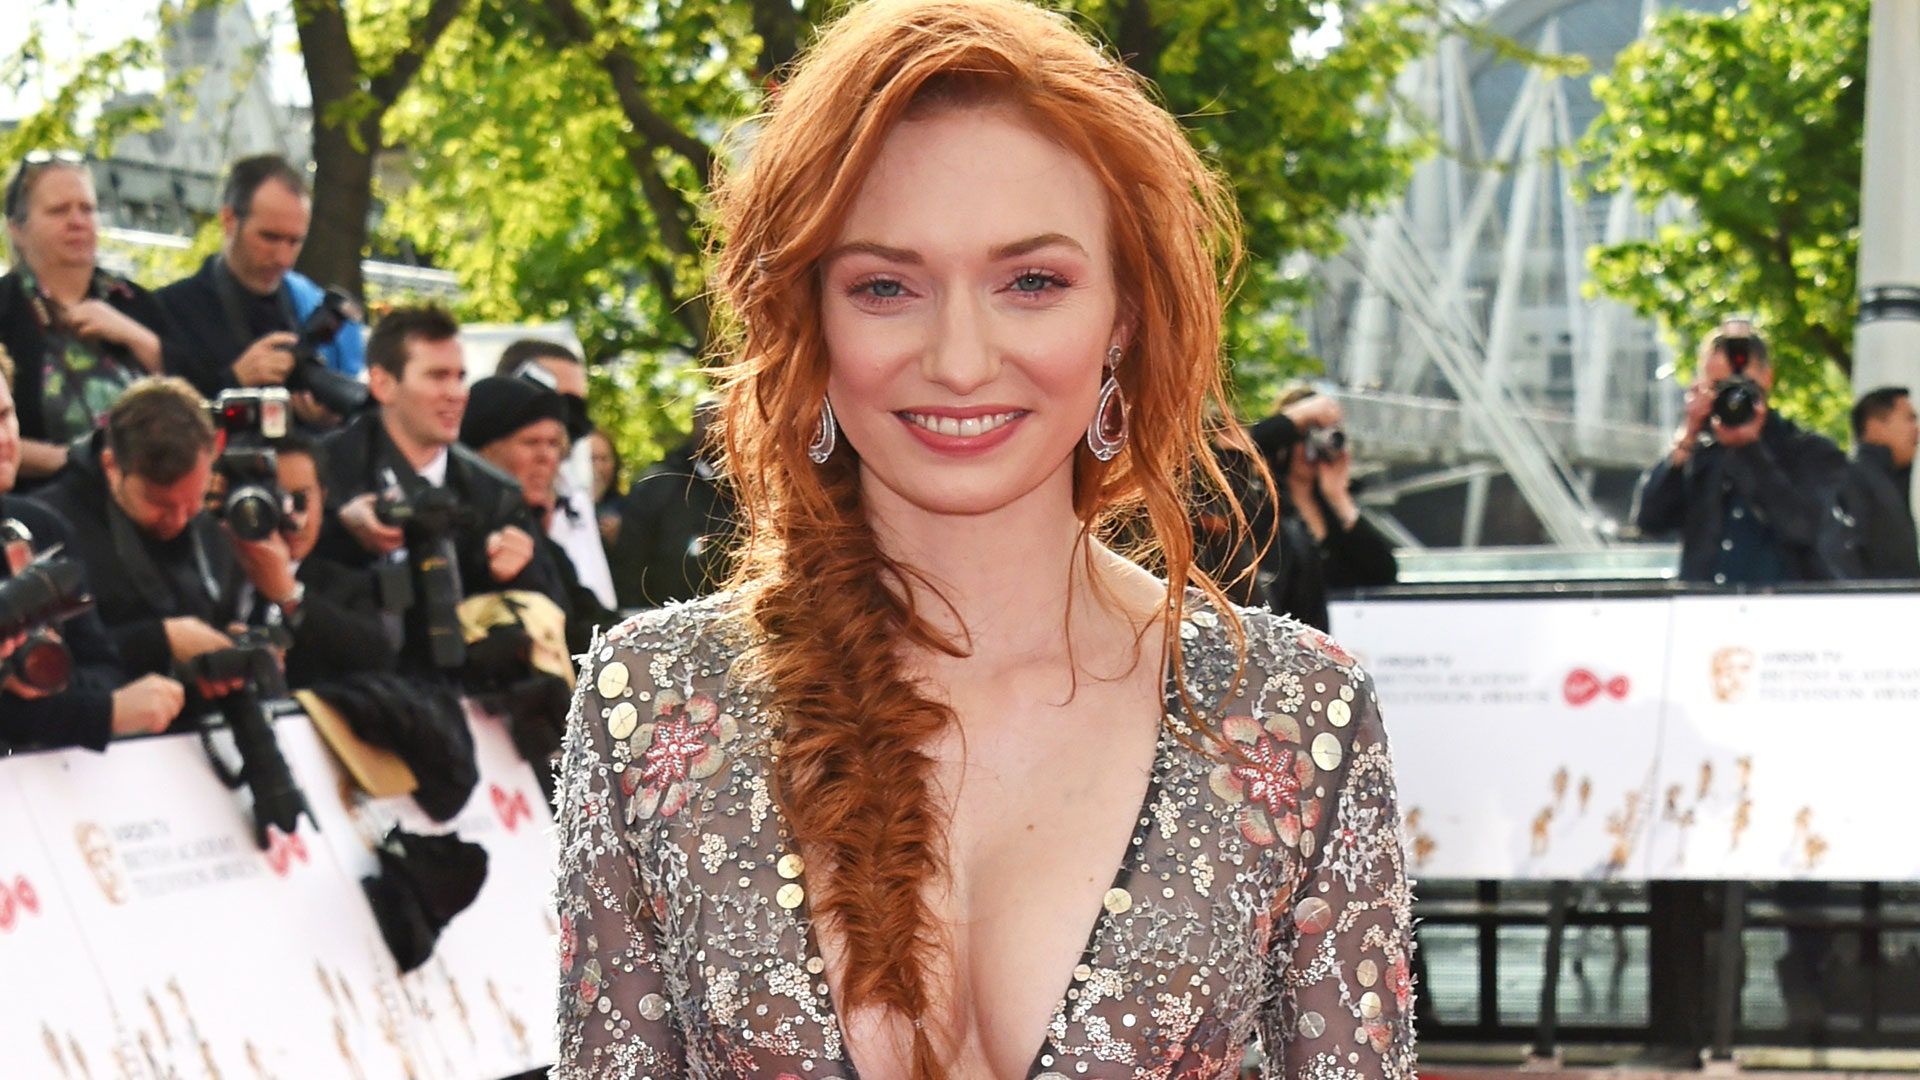 Eleanor Tomlinson on her luck working in a competitive industry